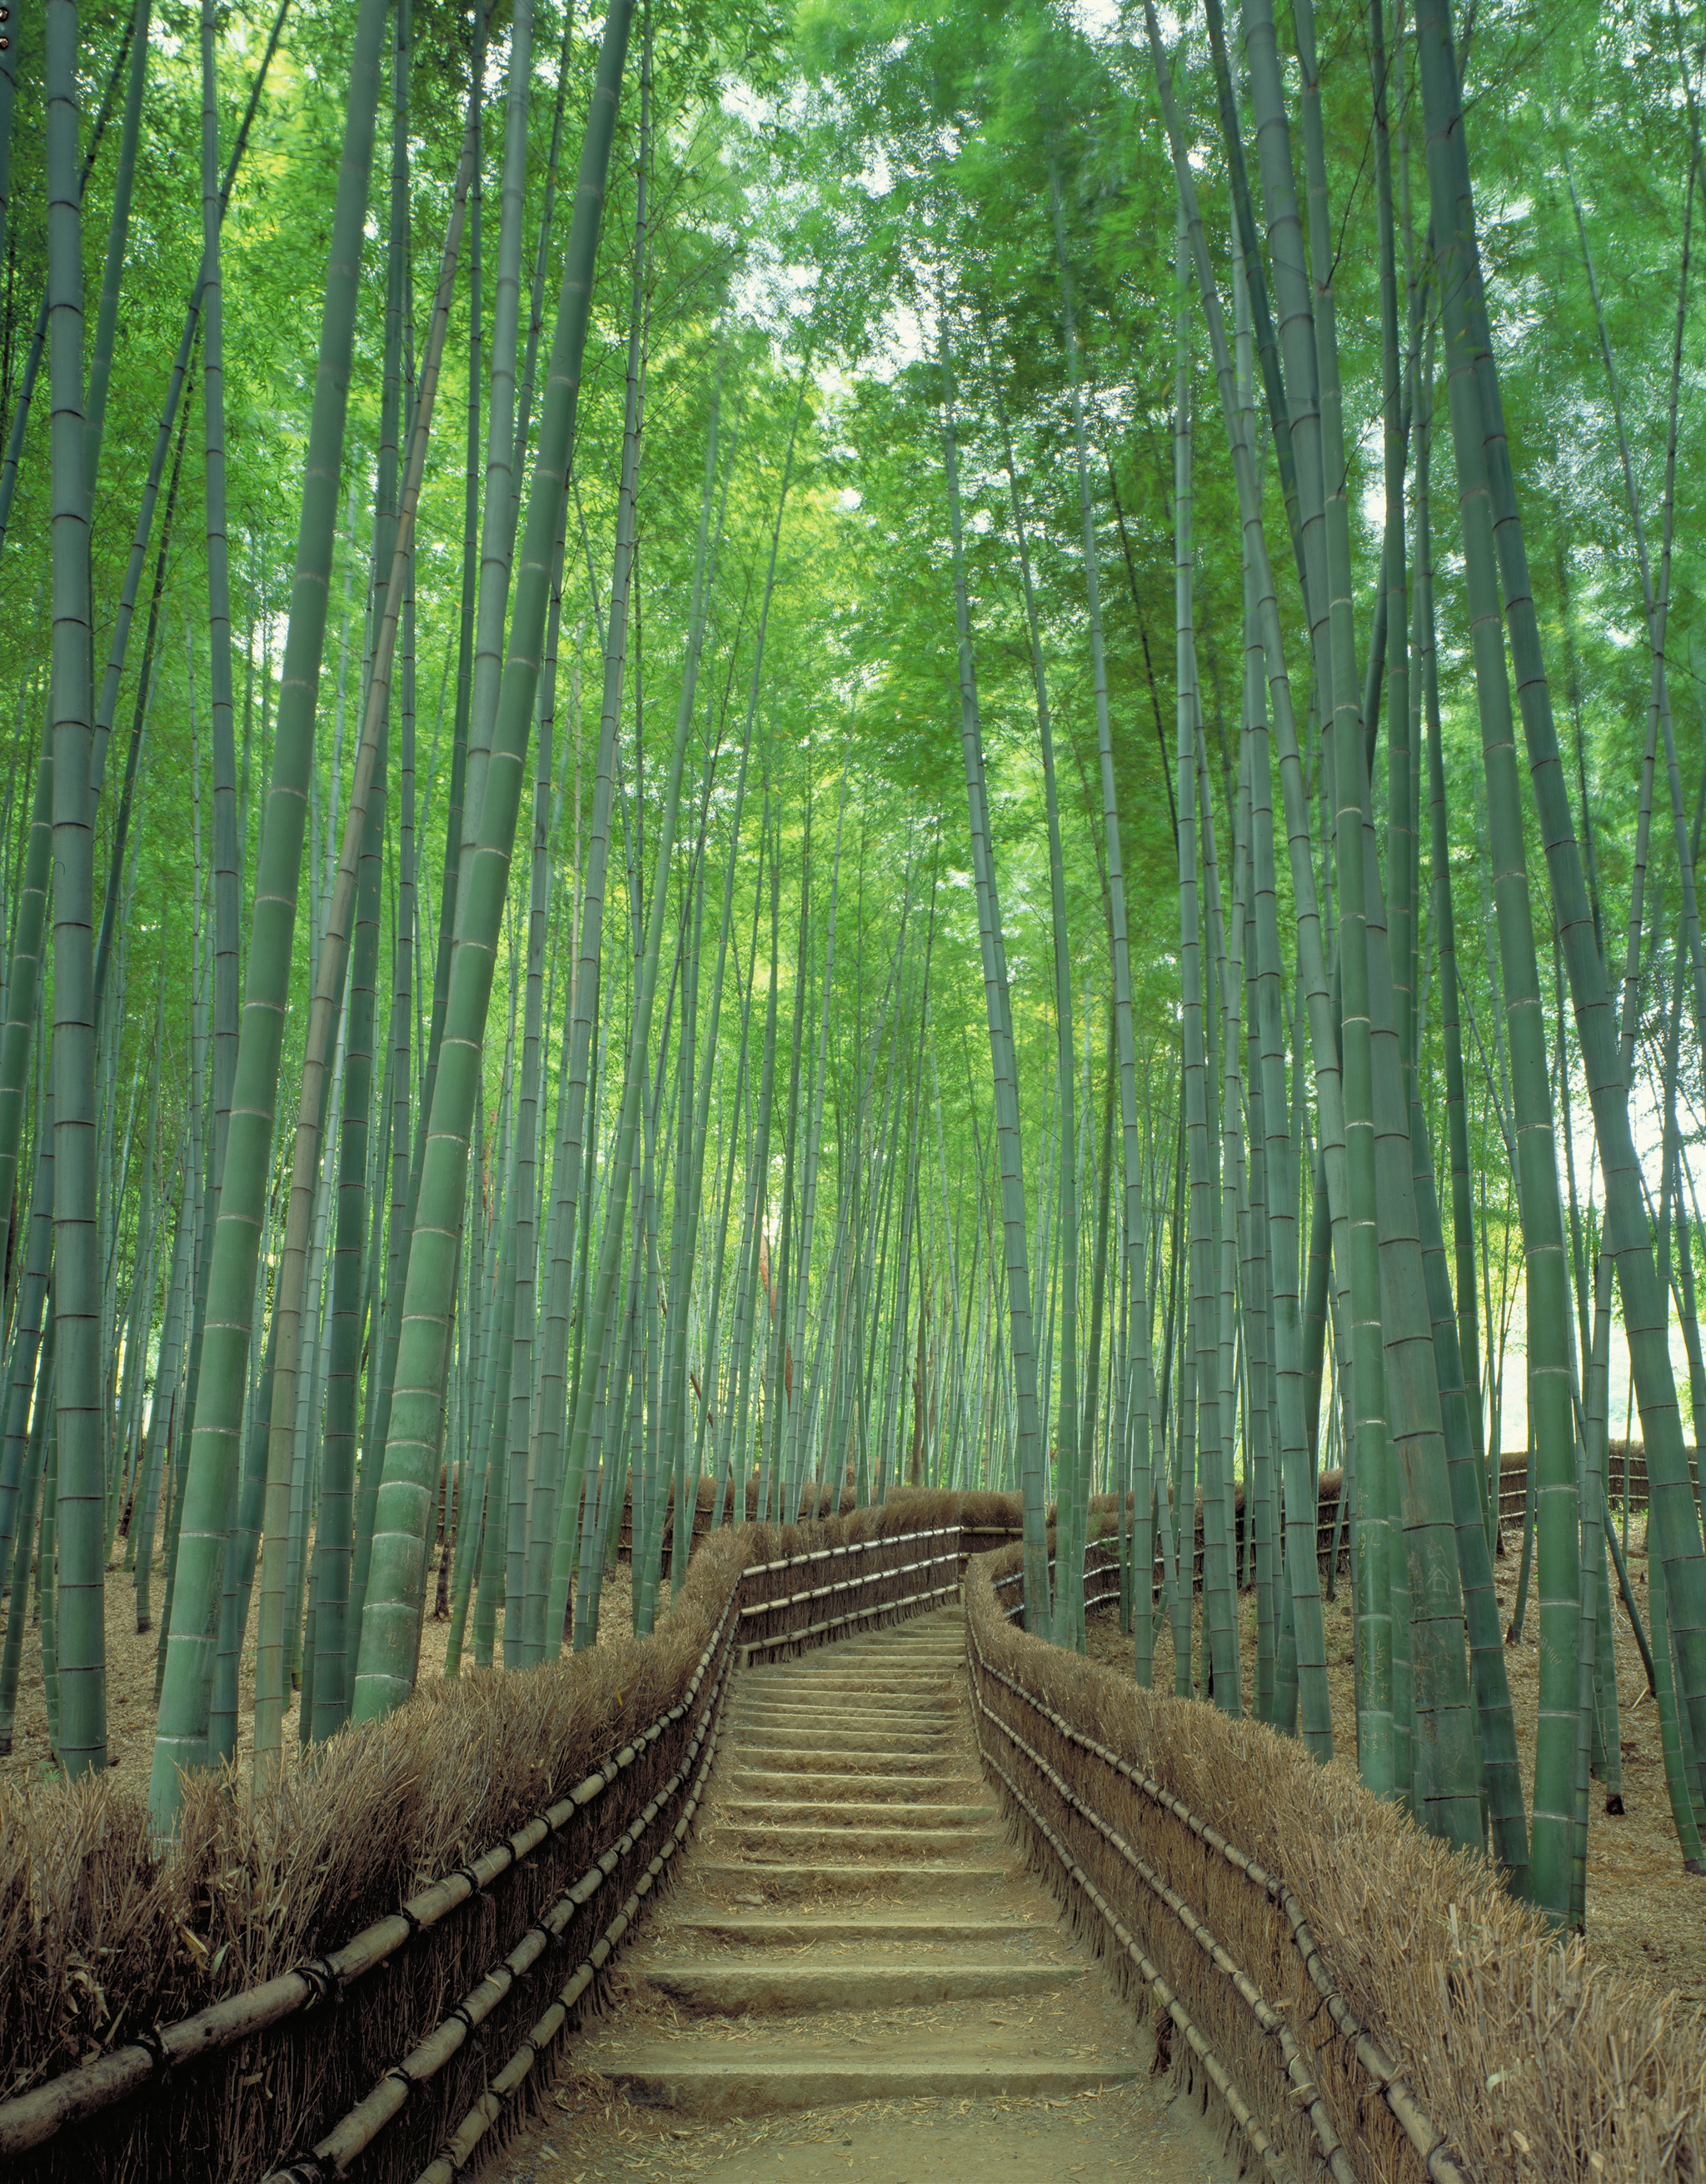 Sagano Bamboo Forest in Kyoto: One of world's prettiest groves | CNN ...